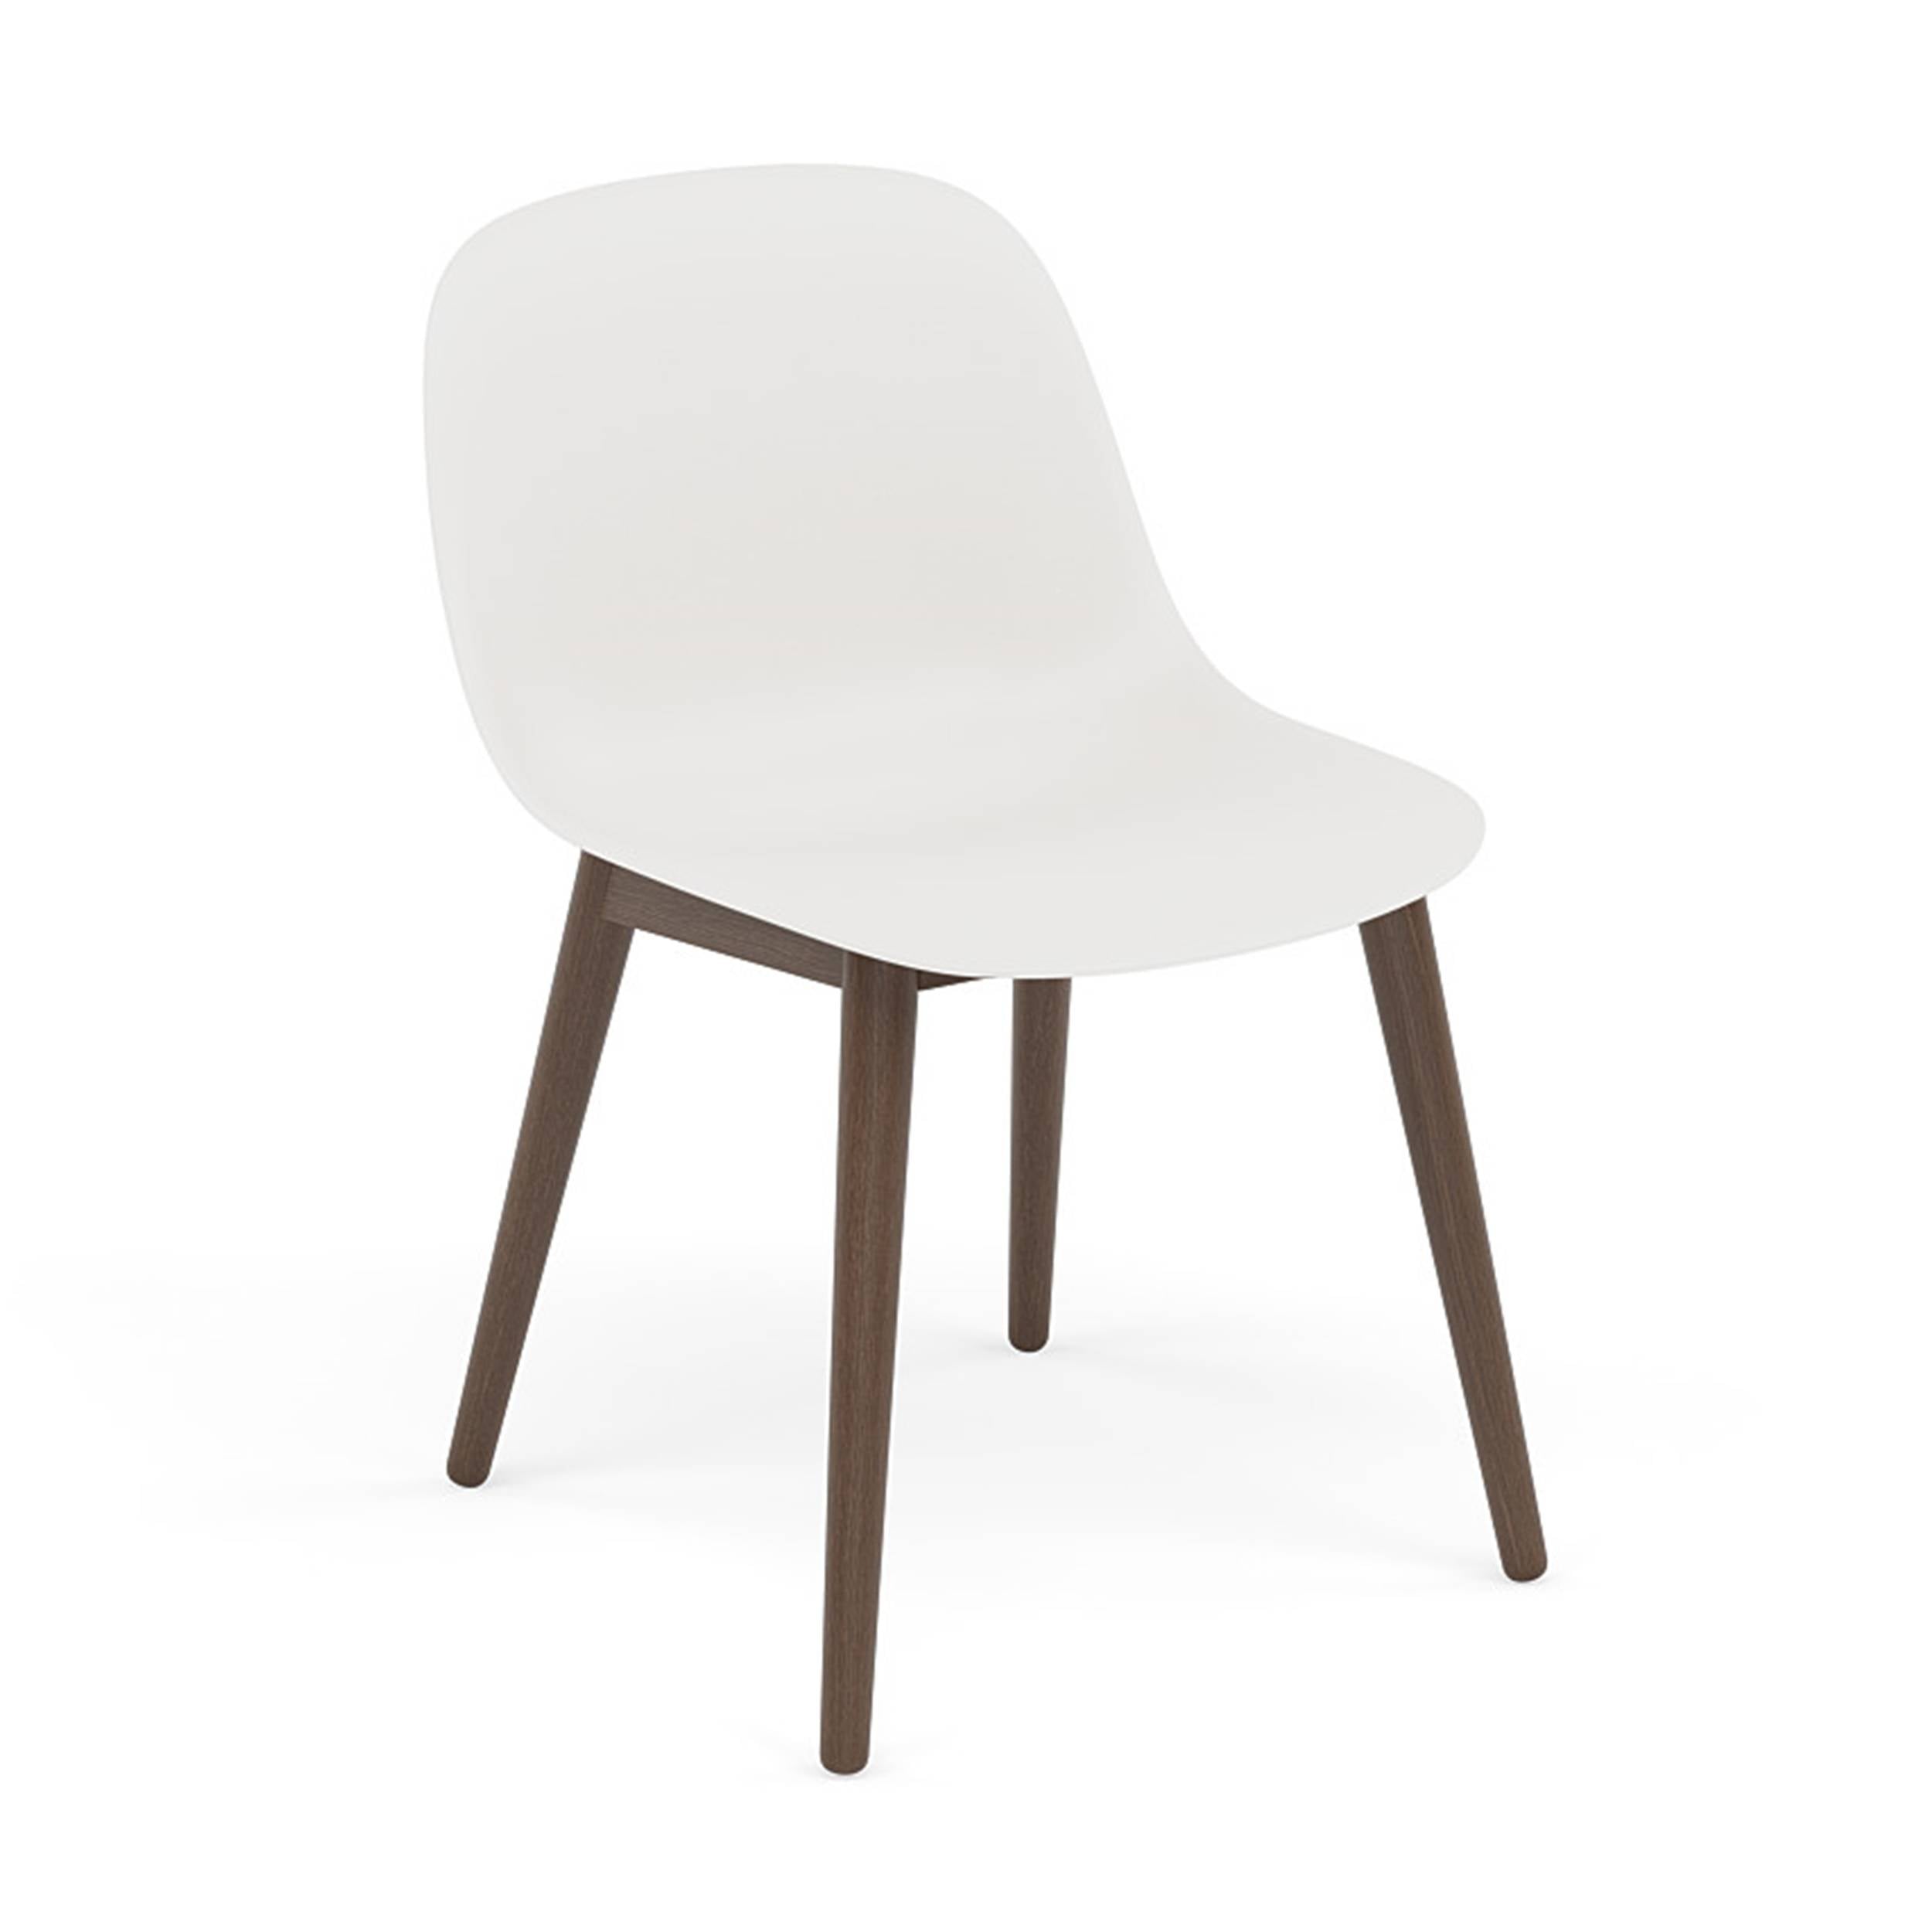 Fiber Side Chair: Wood Base + Recycled Shell +  Stained Dark Brown + Natural White